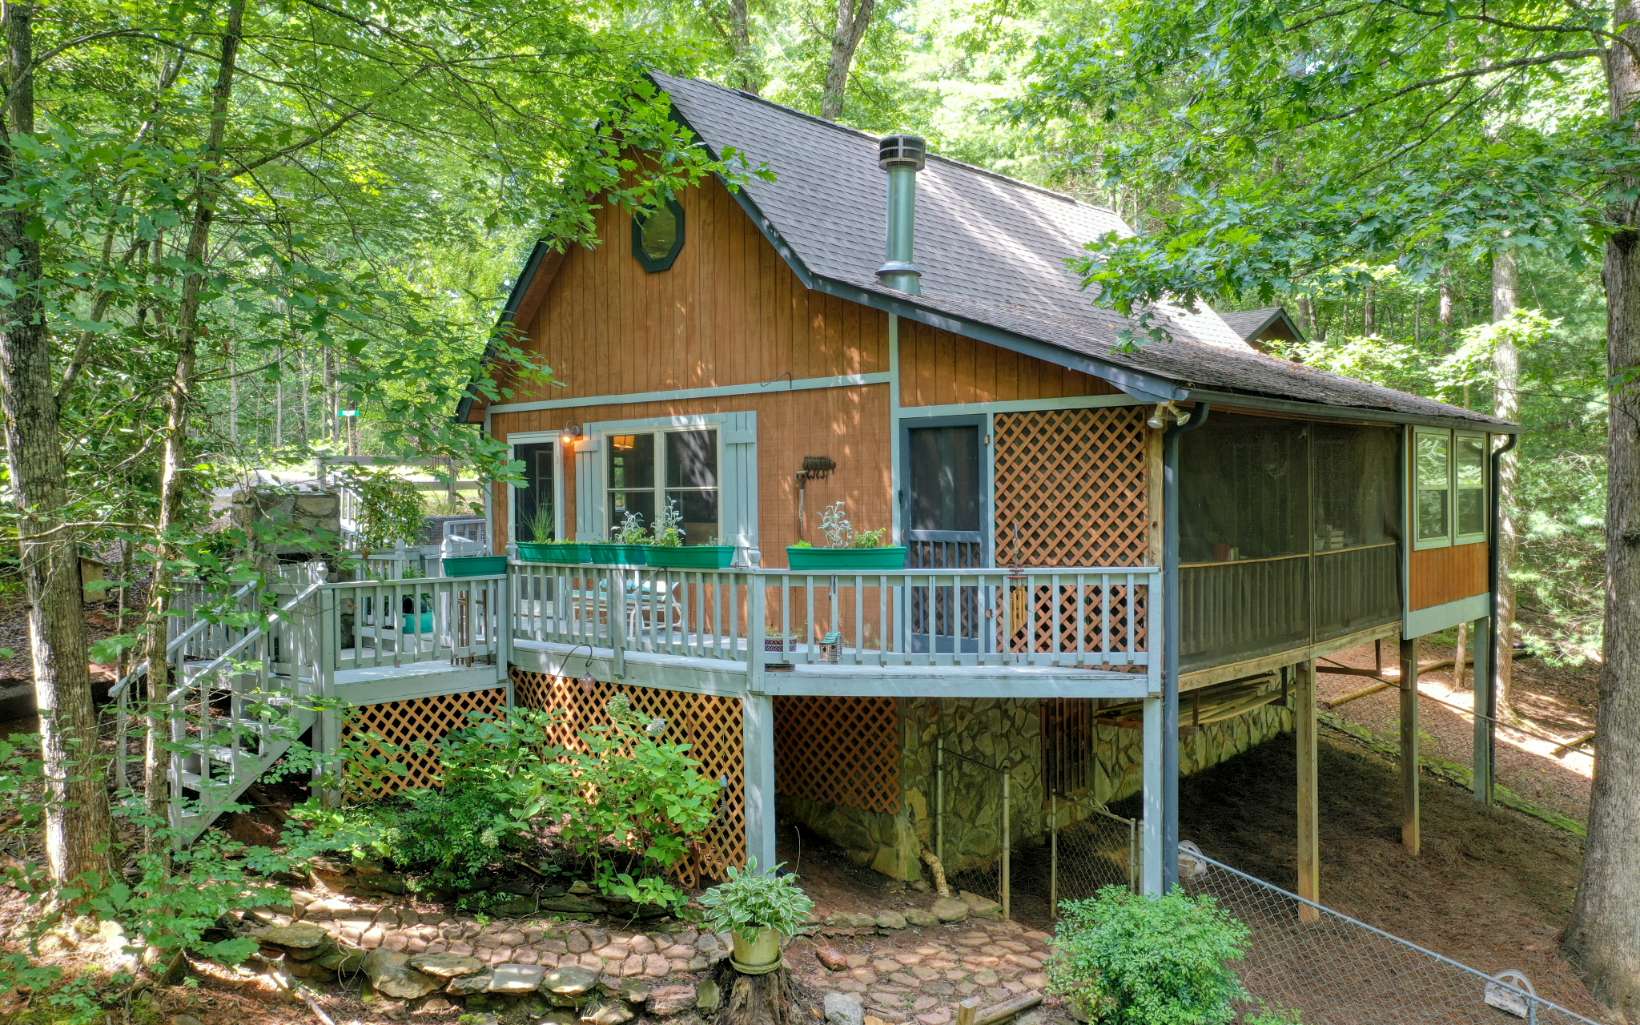 Darlin little cabin nestled in the woods w/ privacy! next to last cabin on rd. 2/1 w/loft being other bedroom. outdoor fireplace/grill area. Extended Master Bedroom main level (2013). Screened porch. Perfect investment rental. Within 15 minutes of Toccoa River for trout fishing & tubing; Lake Blue Ridge for boating & downtown Downtown Blue Ridge for dining & shopping!!! All at an affordable price for getaway cabin or STR investment!!! (County Roads, Private well; New shingles 2019; New vinyl windows 2014; Bathroom remodel 2020; recently painted porches,etc. (GPS WILL NOT GET YOU TO THIS PROPERTY)